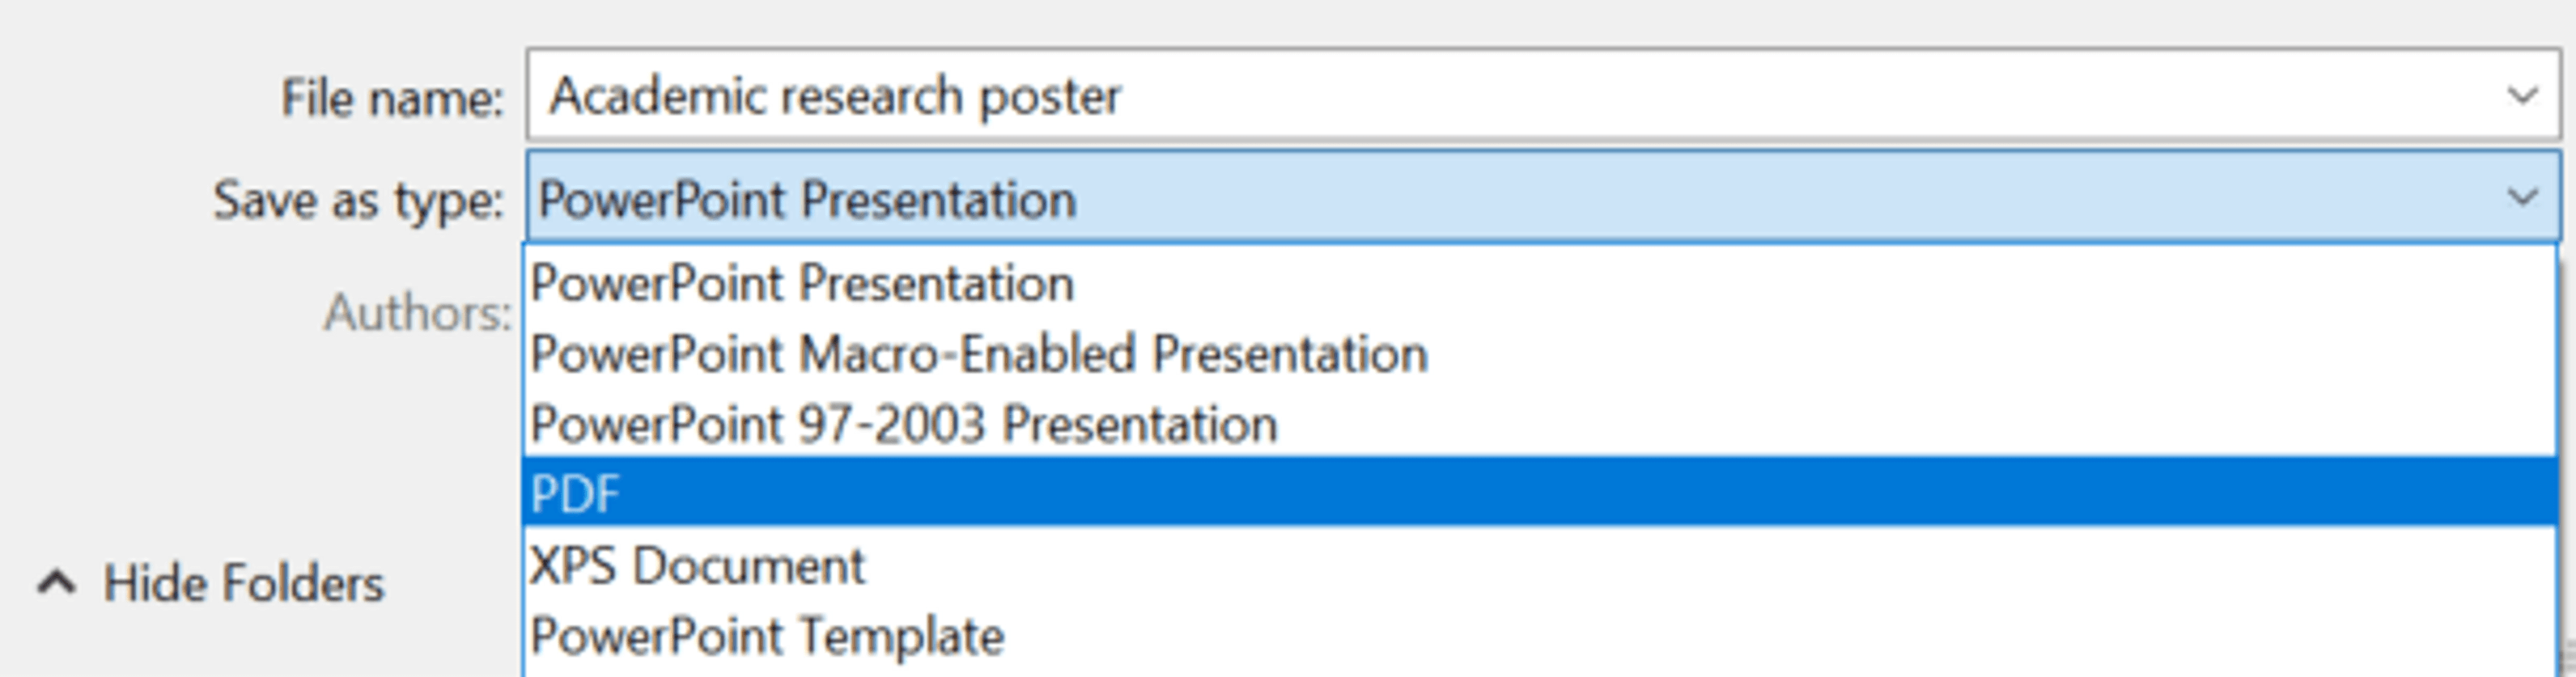 Screenshot of the Save as type drop down menu in PowerPoint. The PDF option is selected. 